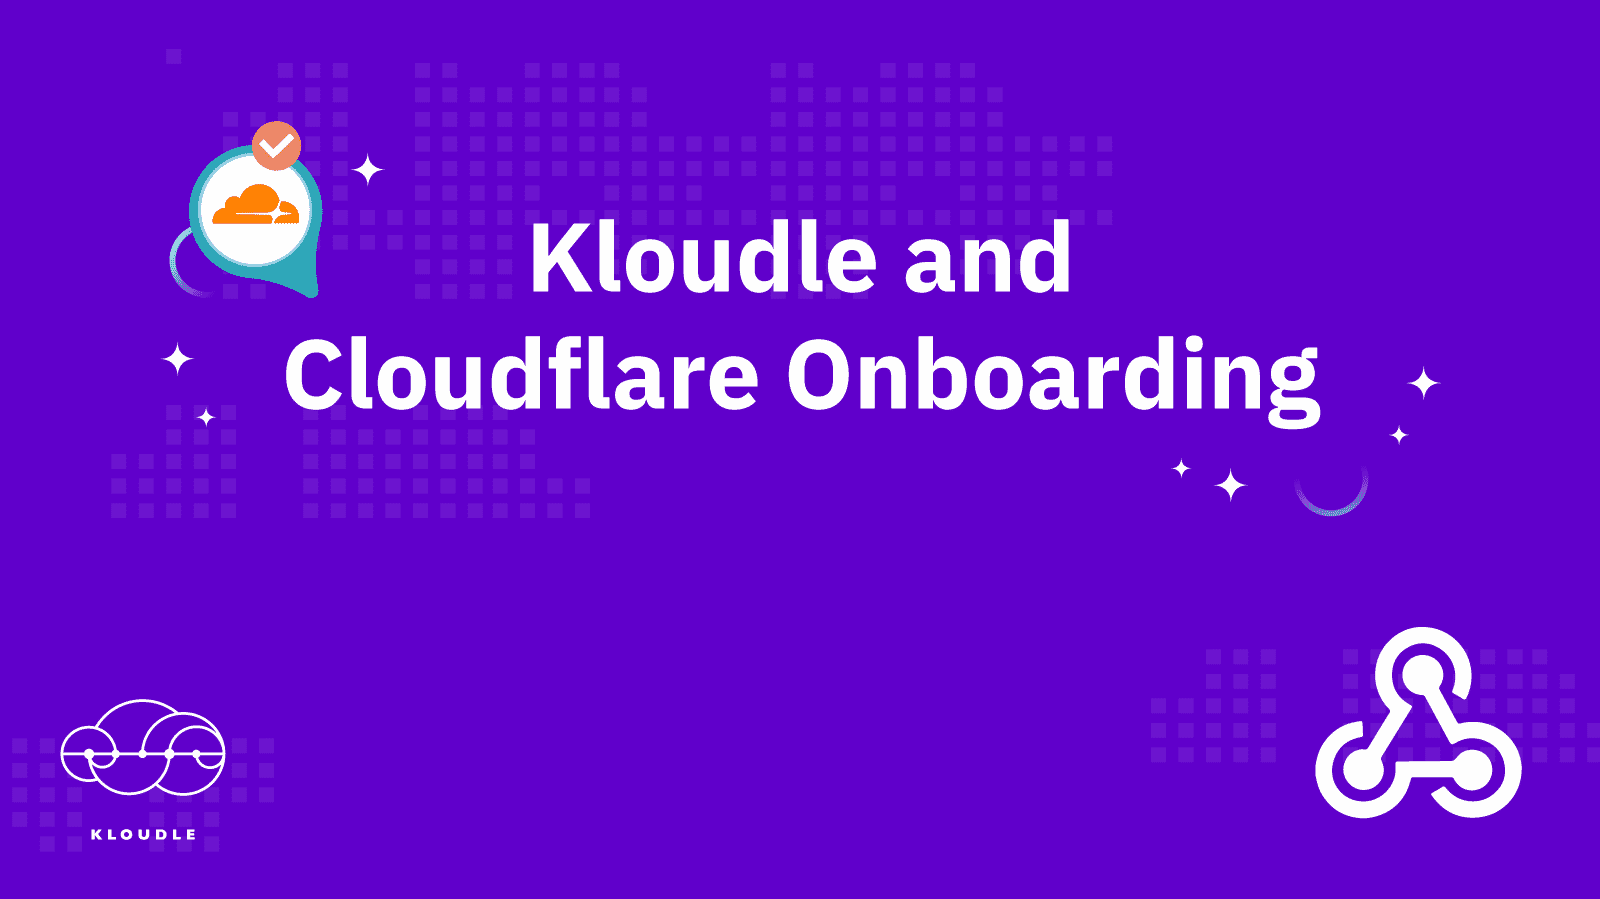 How to Onboard Cloudflare to Kloudle